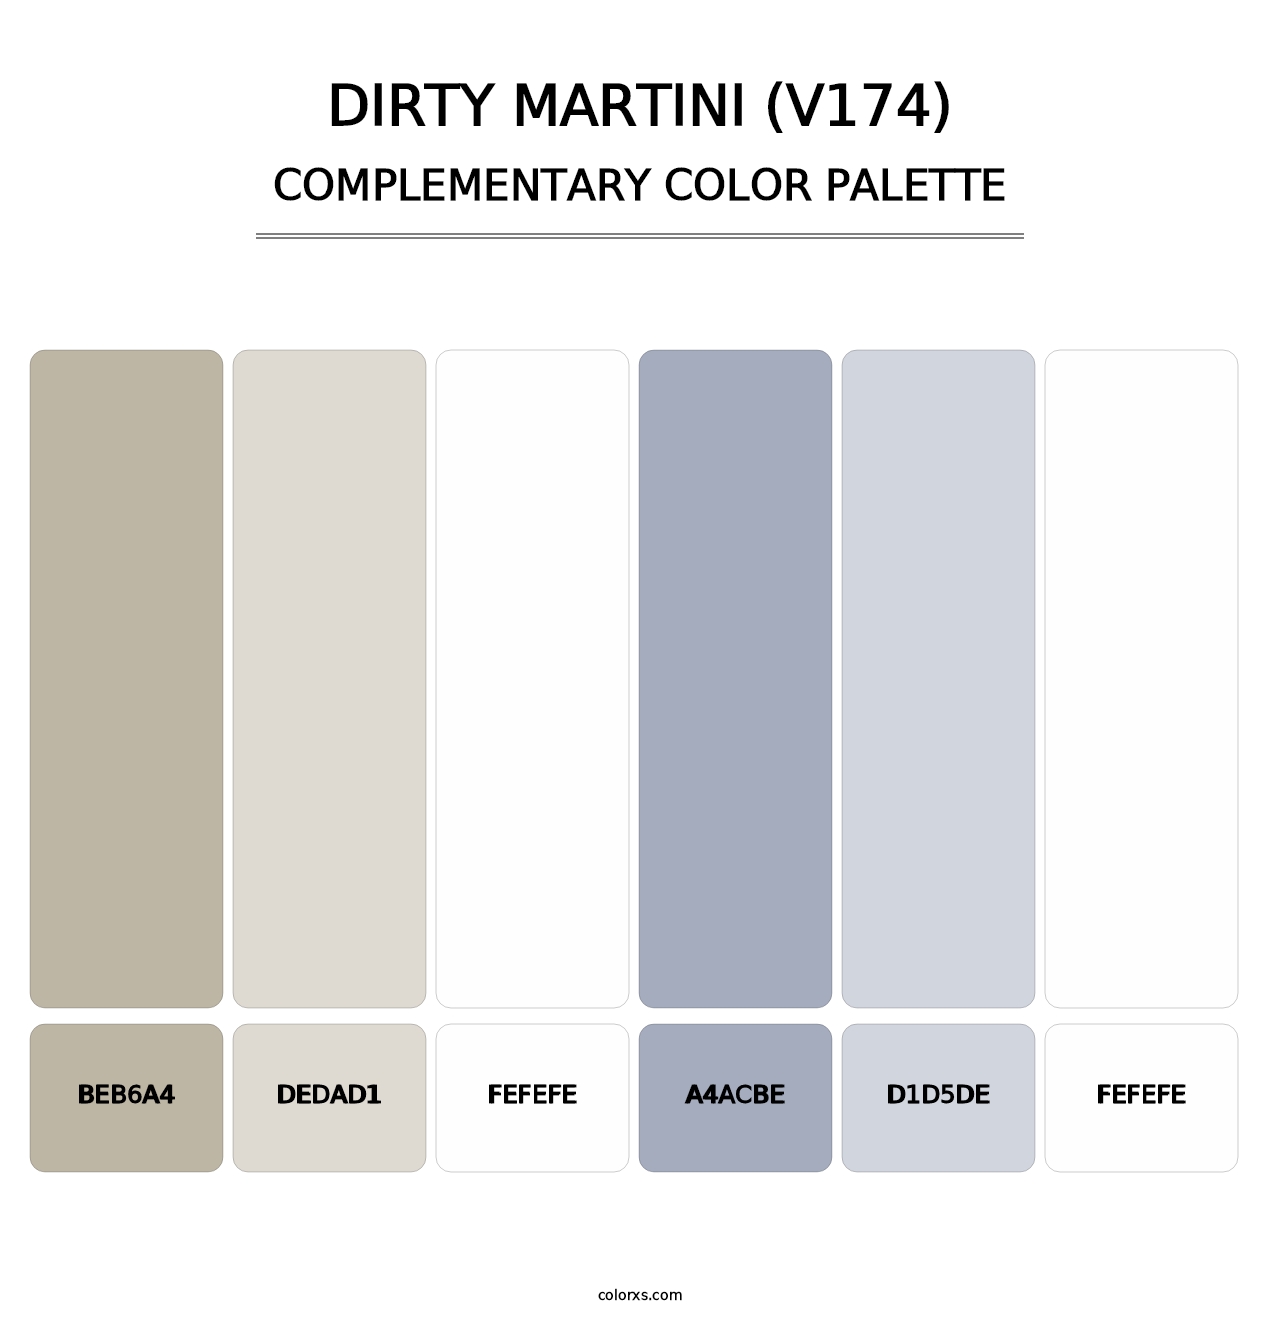 Dirty Martini (V174) - Complementary Color Palette